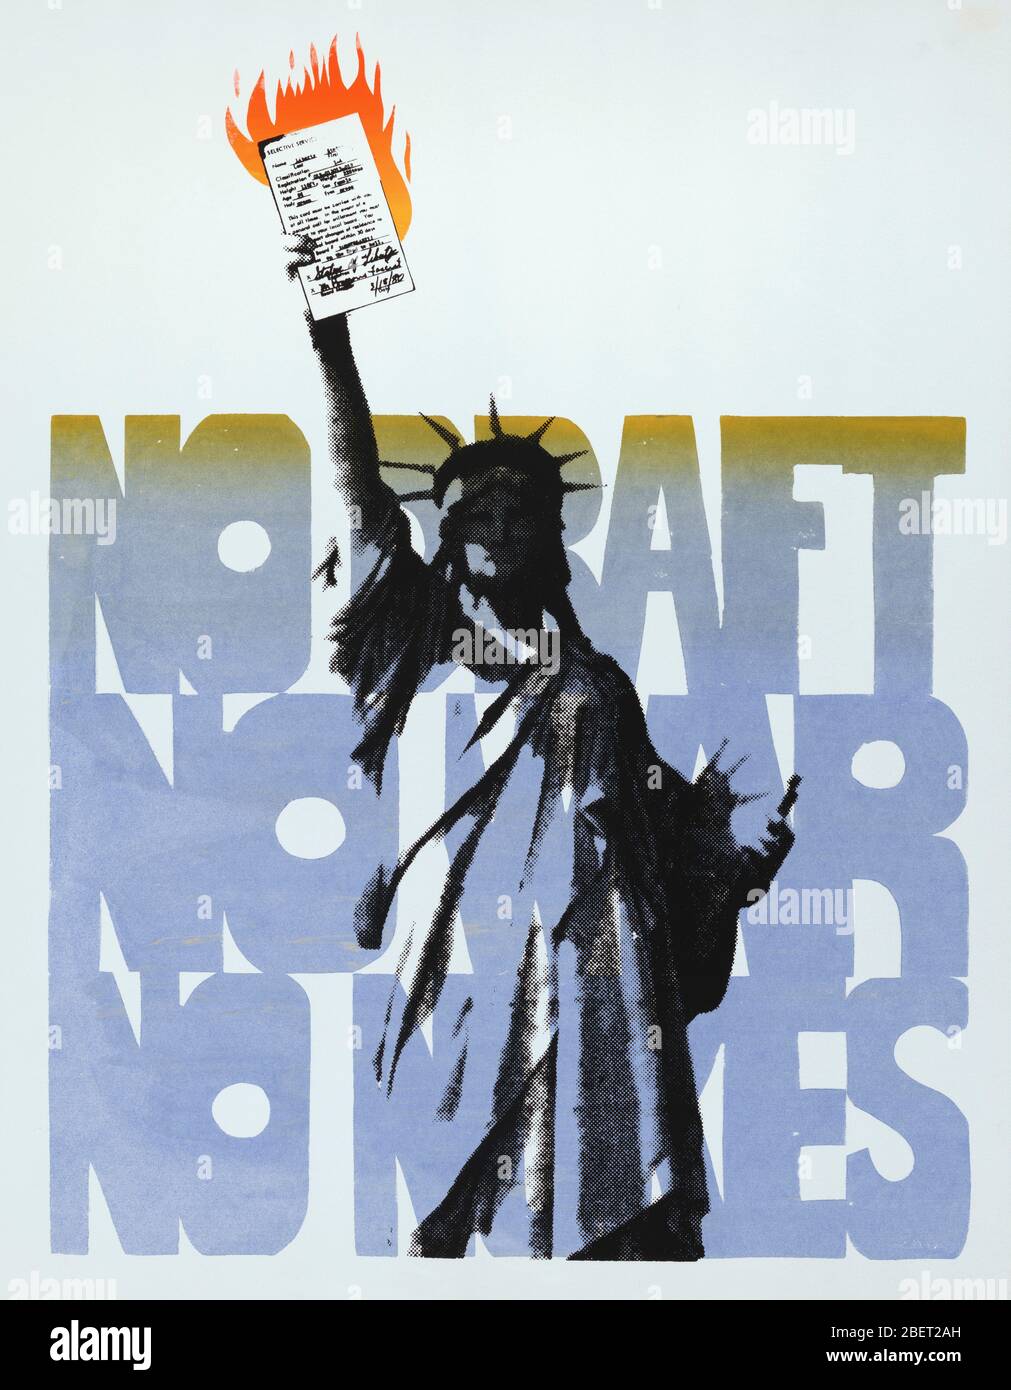 U.S. history print of the Statue of Liberty holding up a burning draft card instead of her torch. Stock Photo